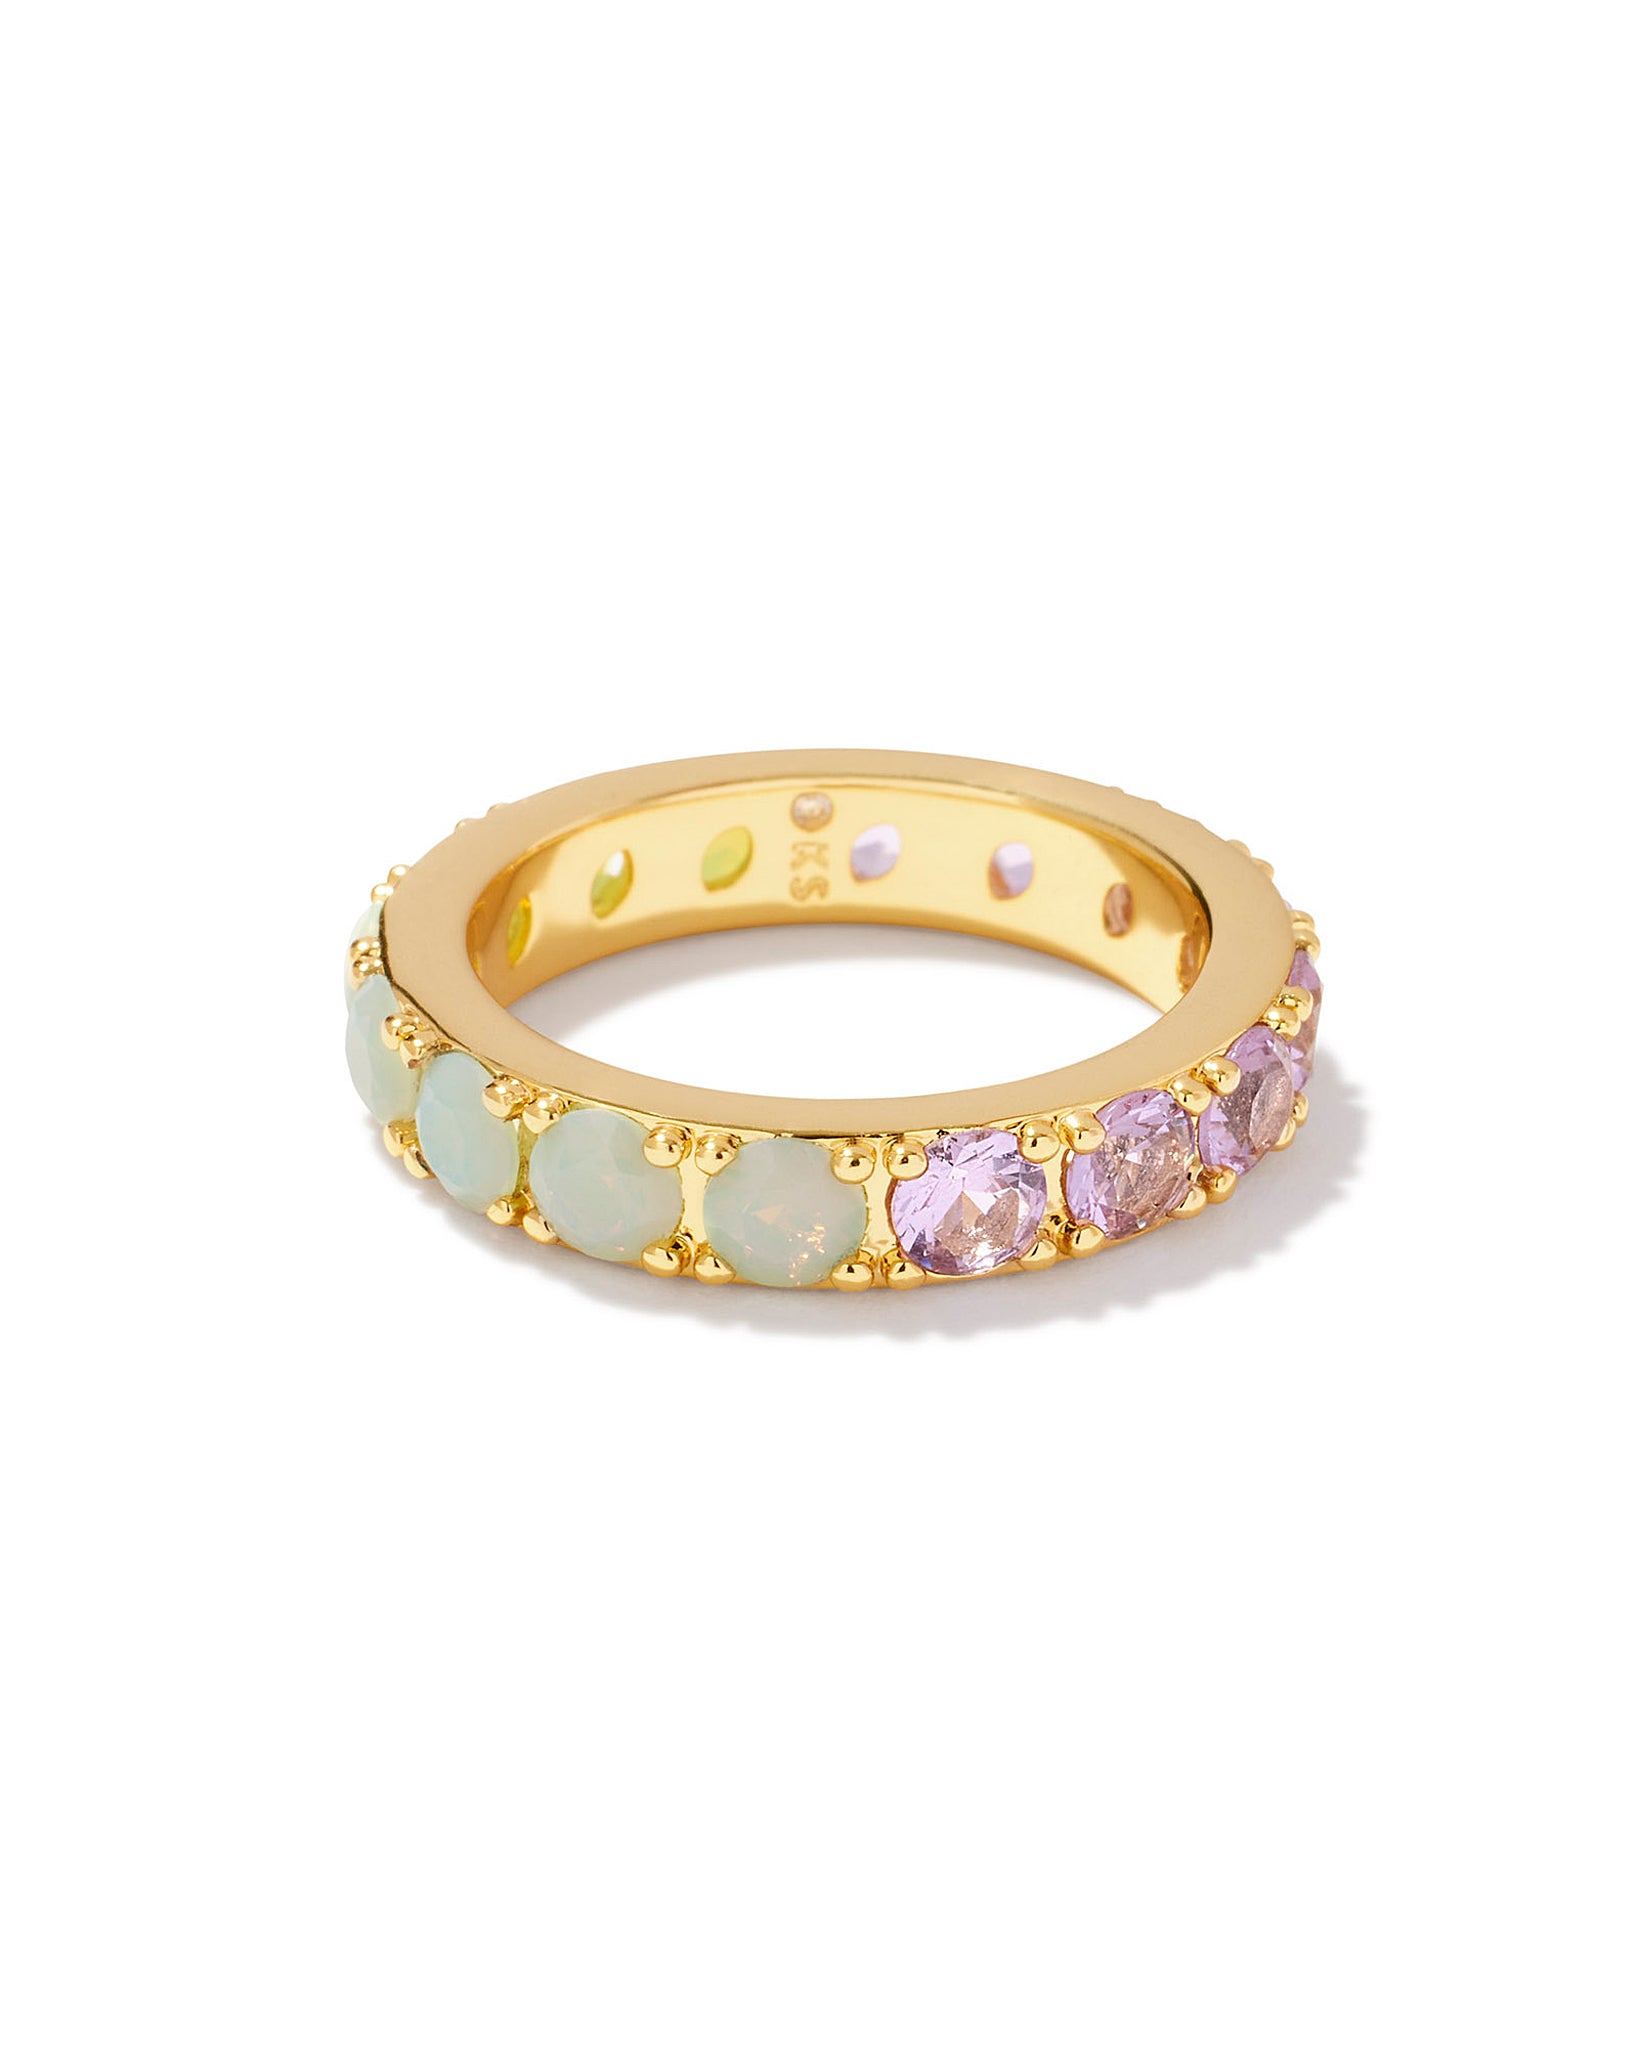 Kendra Scott Chandler Band Ring in Green Lilac Mix and Gold Size 7